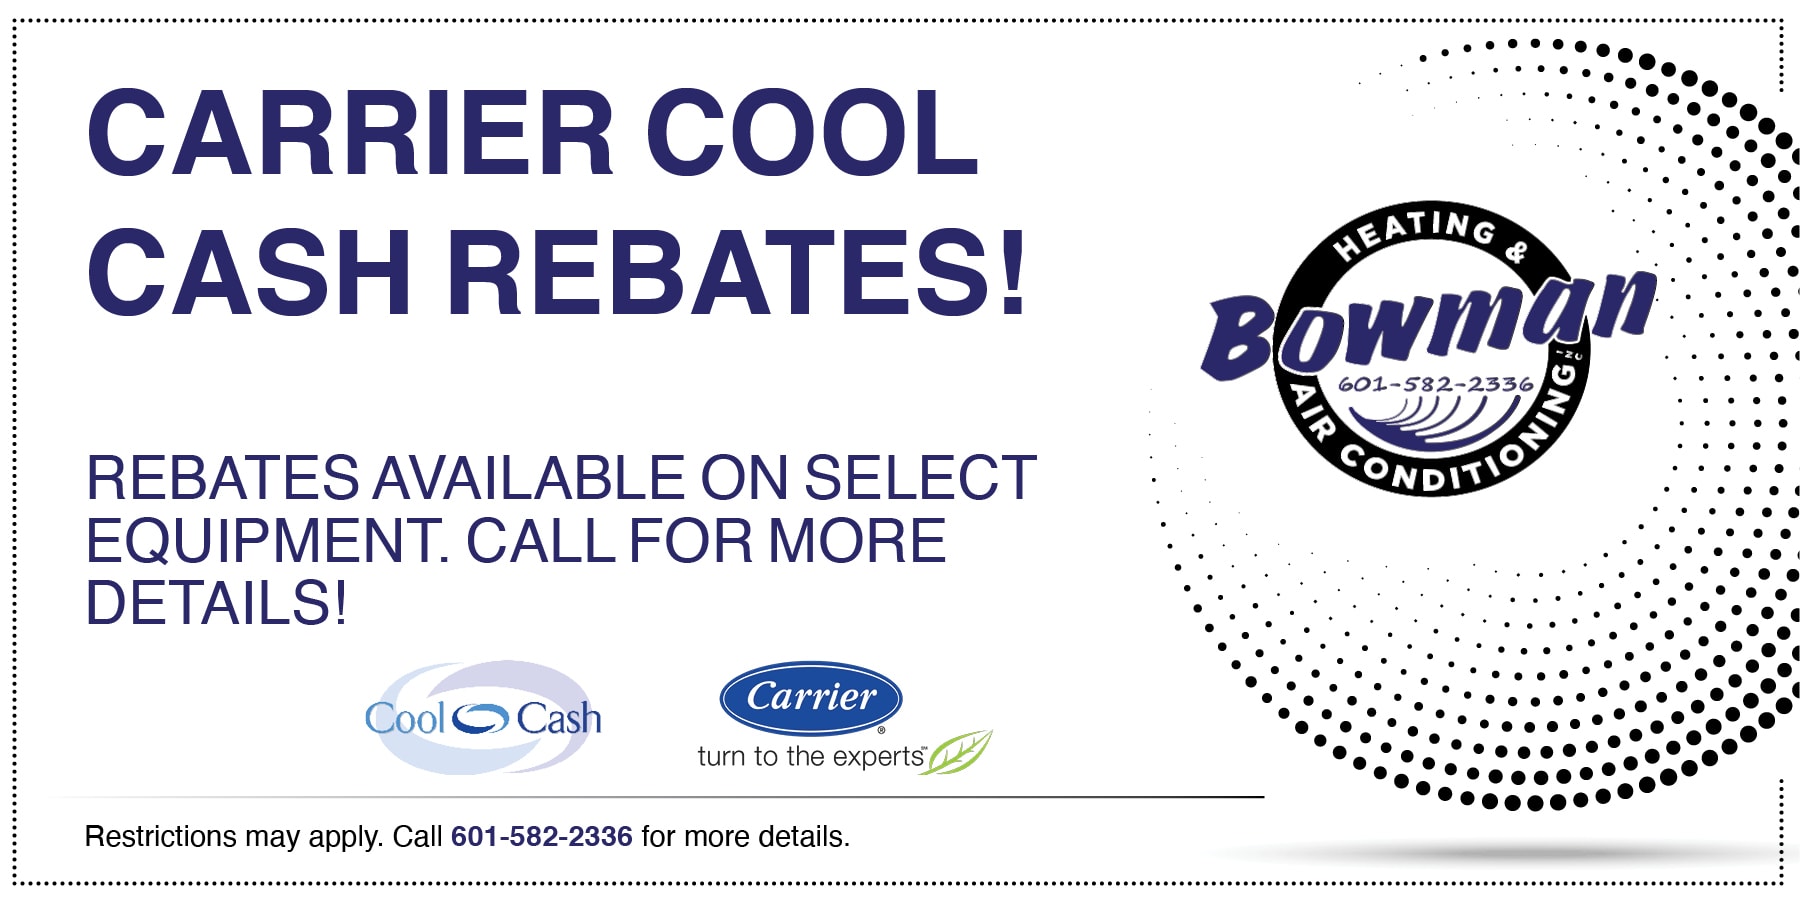 Special Promotion announcing that Carrier Cool Cash Rebates are available now. Offer is valid on qualifying equipment, call for more information. 601-582-2336